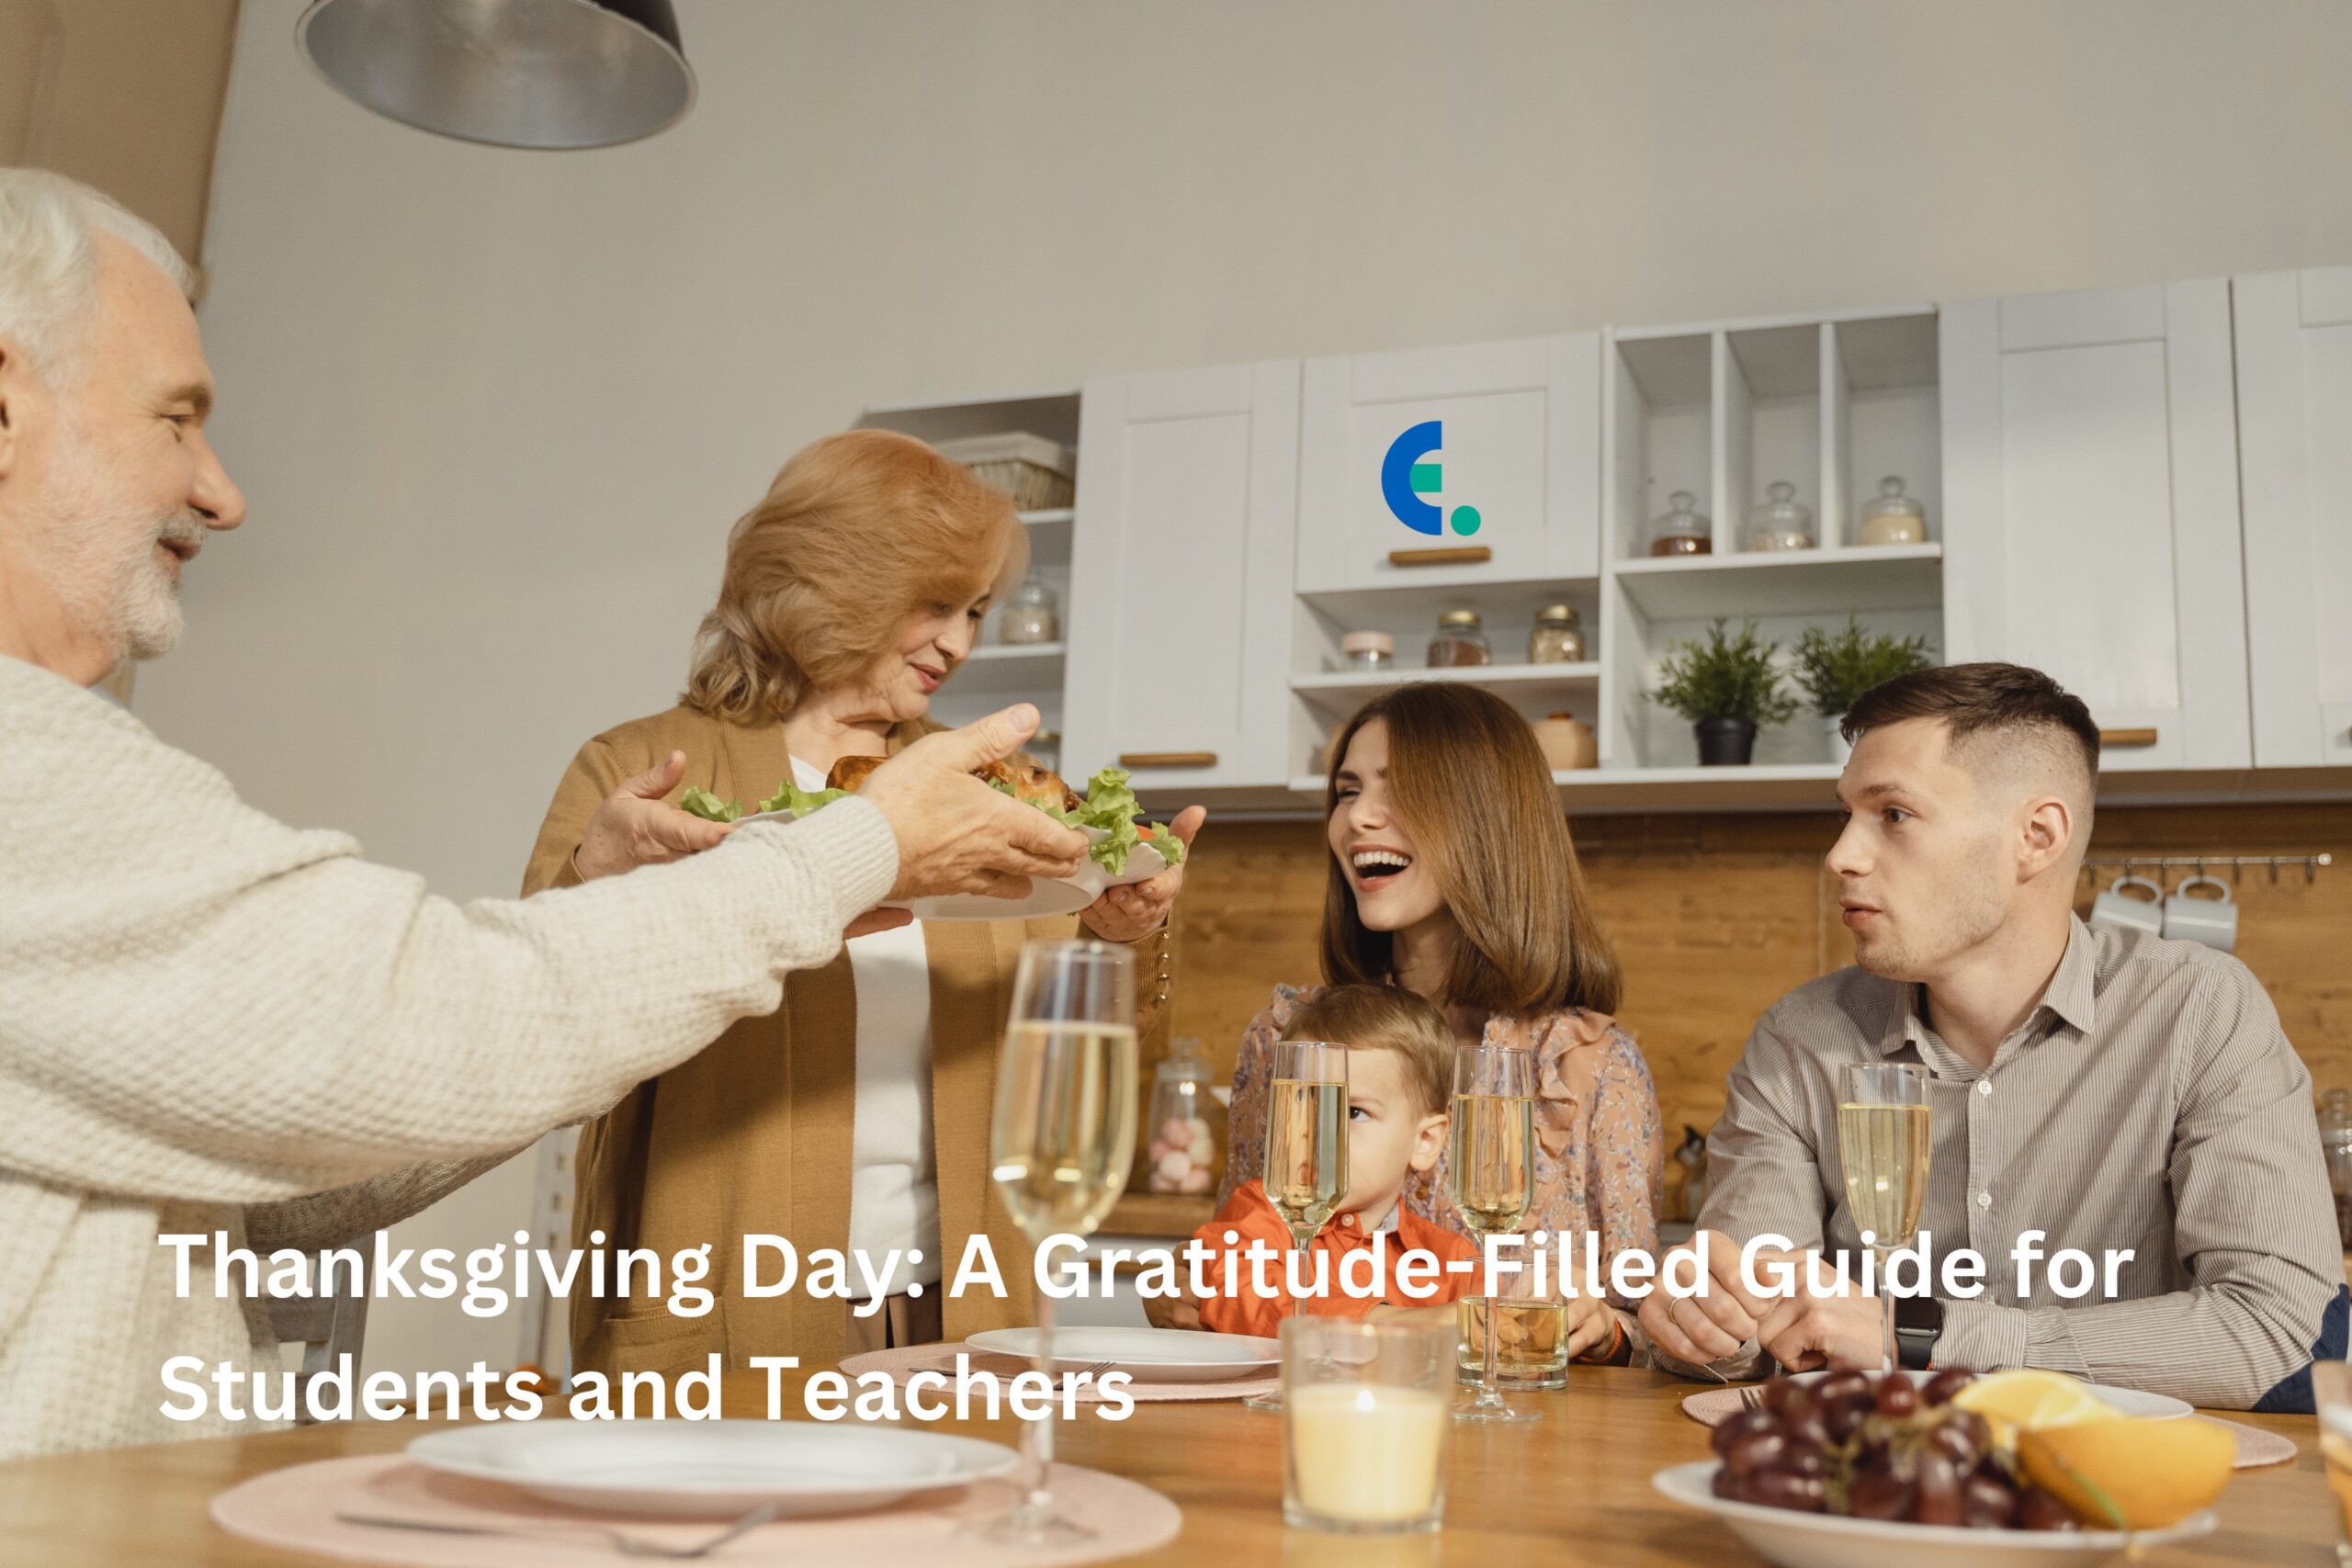 Thanksgiving Day: A Gratitude-Filled Guide for Students and Teachers